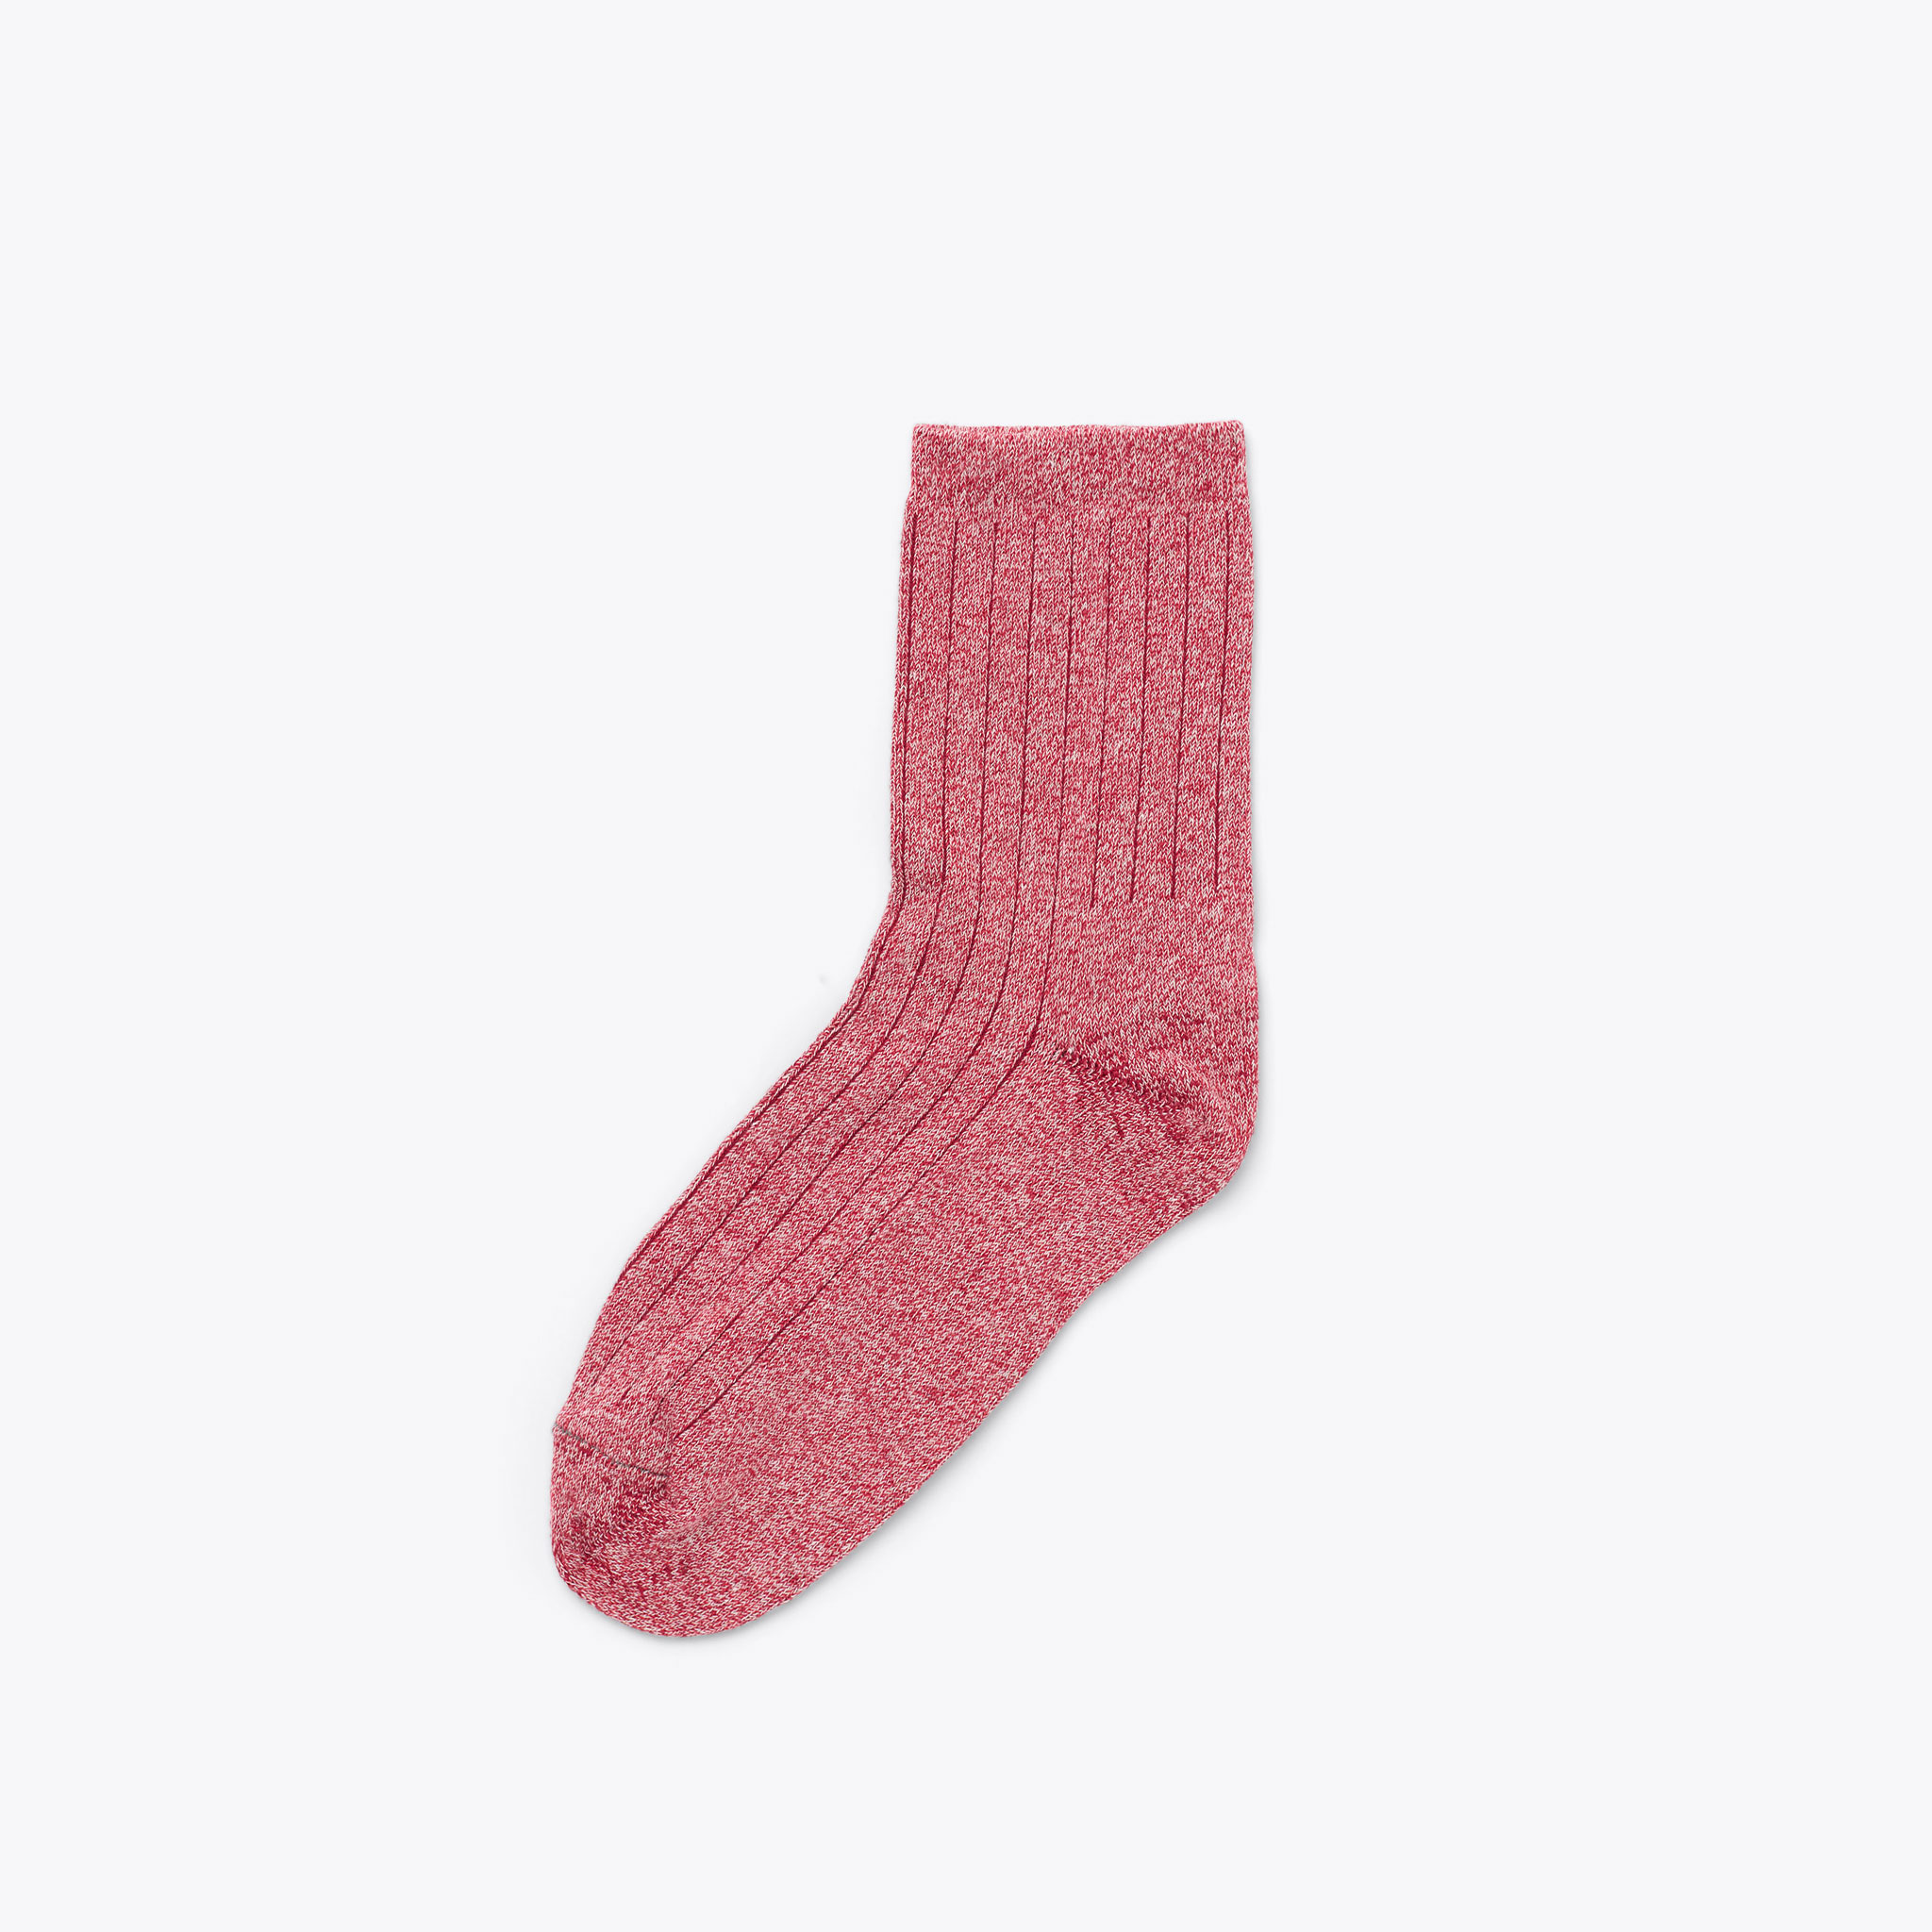 Nisolo Cotton Mid Sock Mahogony Marl - Every Nisolo product is built on the foundation of comfort, function, and design. 